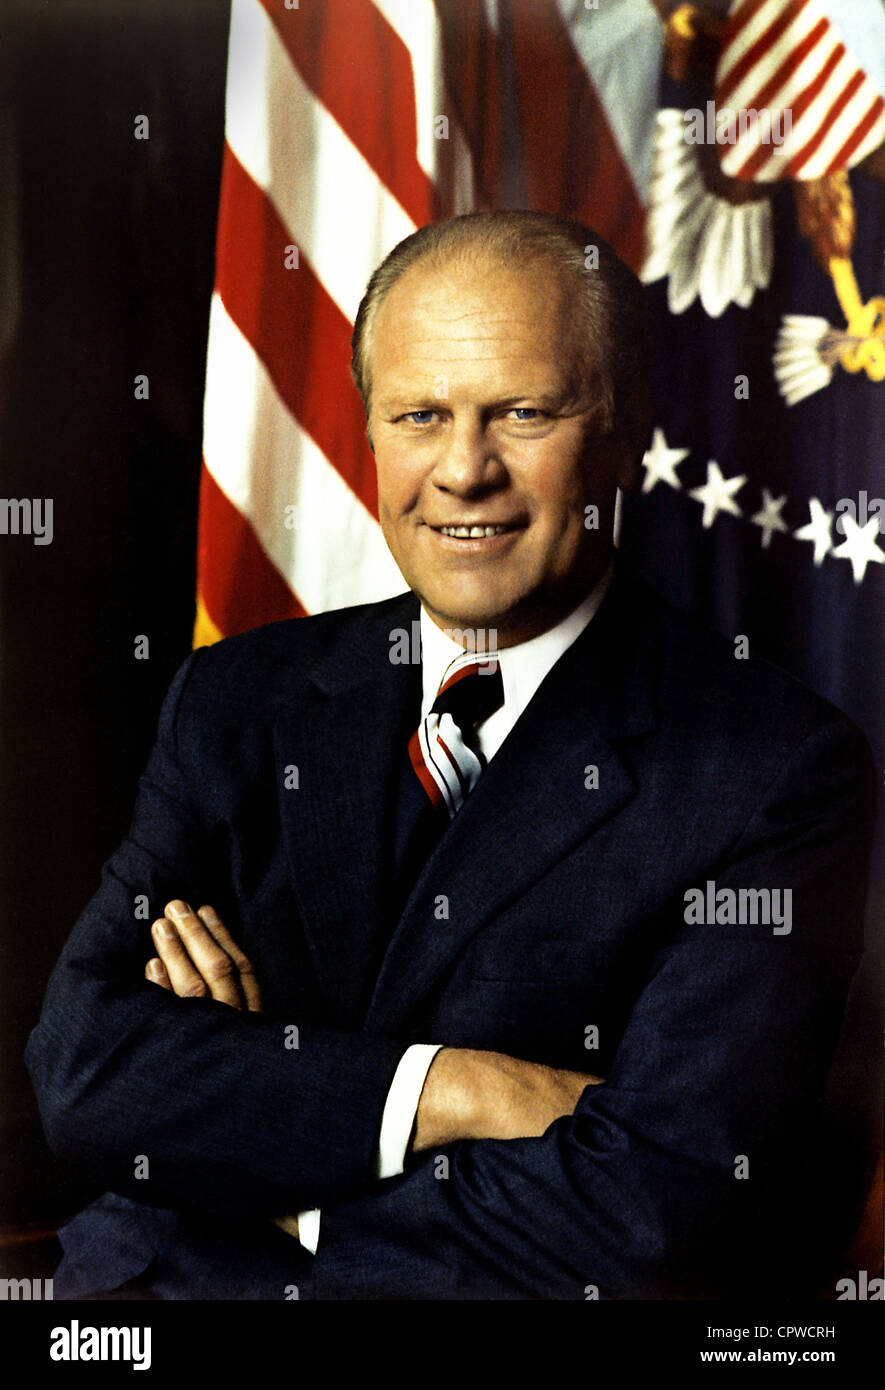 Gerald Ford, 38th President of the United States. Stock Photo